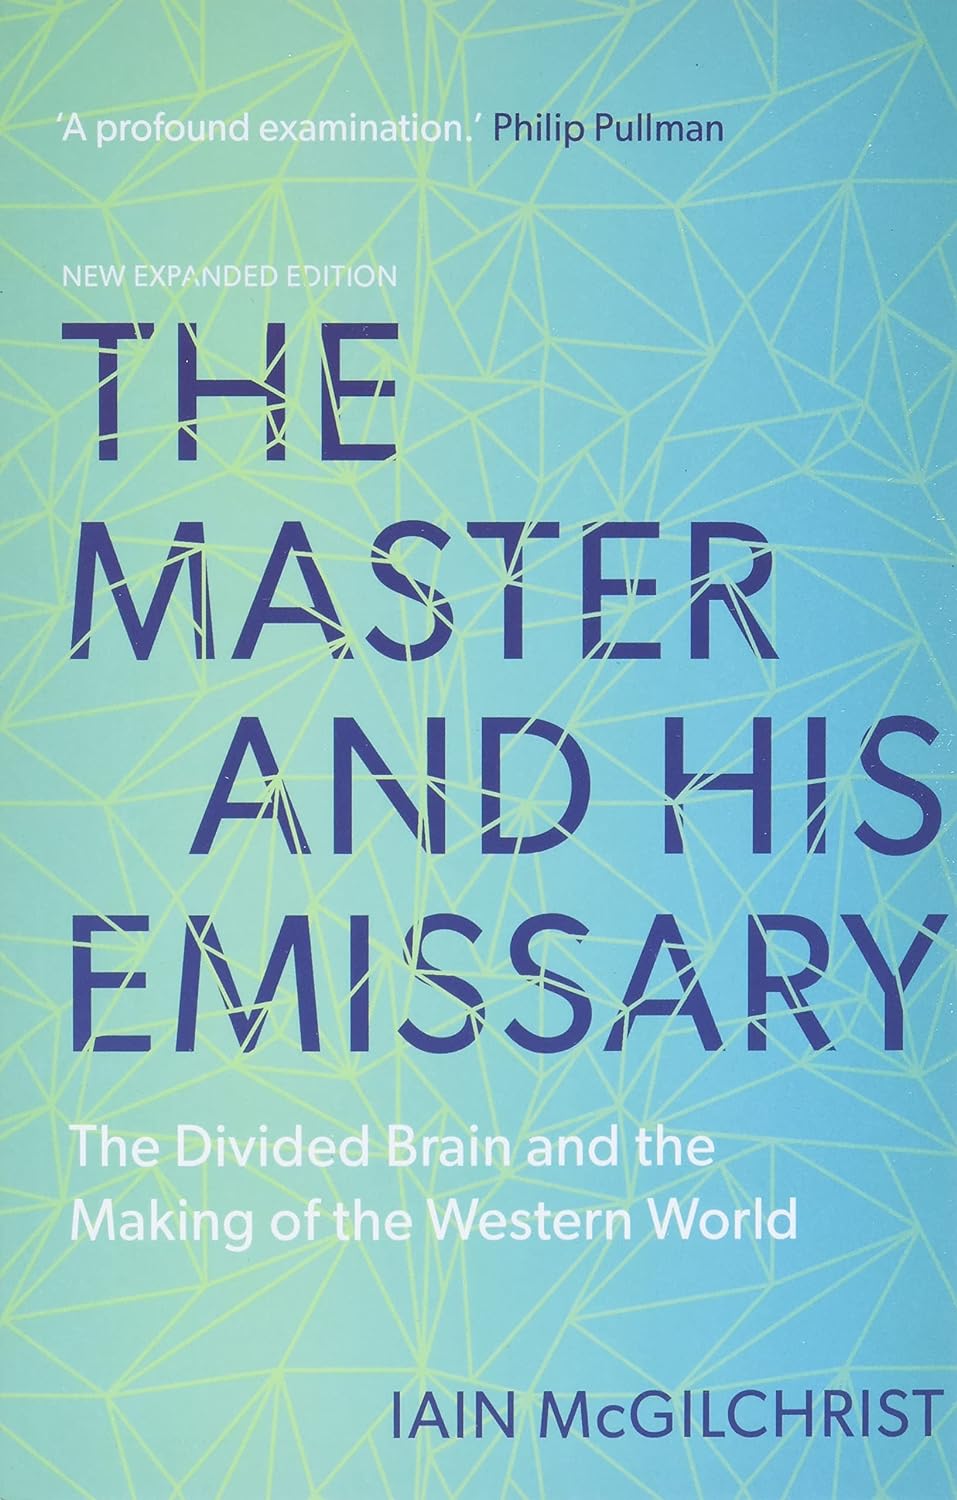 The Master and His Emissary: The Divided Brain and the Making of the Western World